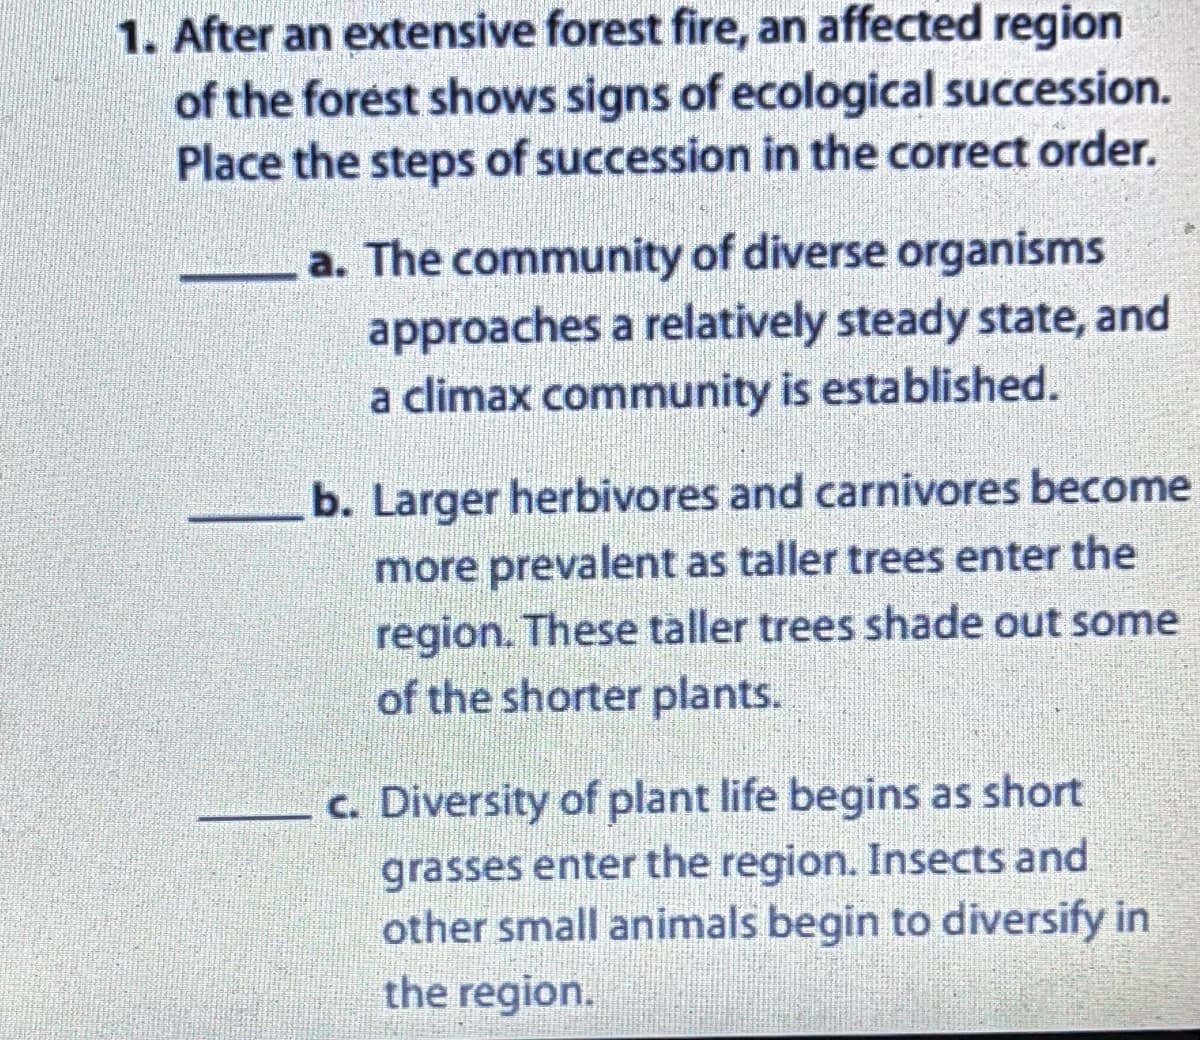 1. After an extensive forest fire, an affected region
of the forest shows signs of ecological succession.
Place the steps of succession in the correct order.
a. The community of diverse organisms
approaches a relatively steady state, and
a climax community is established.
b. Larger herbivores and carnivores become
more prevalent as taller trees enter the
region. These taller trees shade out some
of the shorter plants.
c. Diversity of plant life begins as short
grasses enter the region. Insects and
other small animals begin to diversify in
the region.